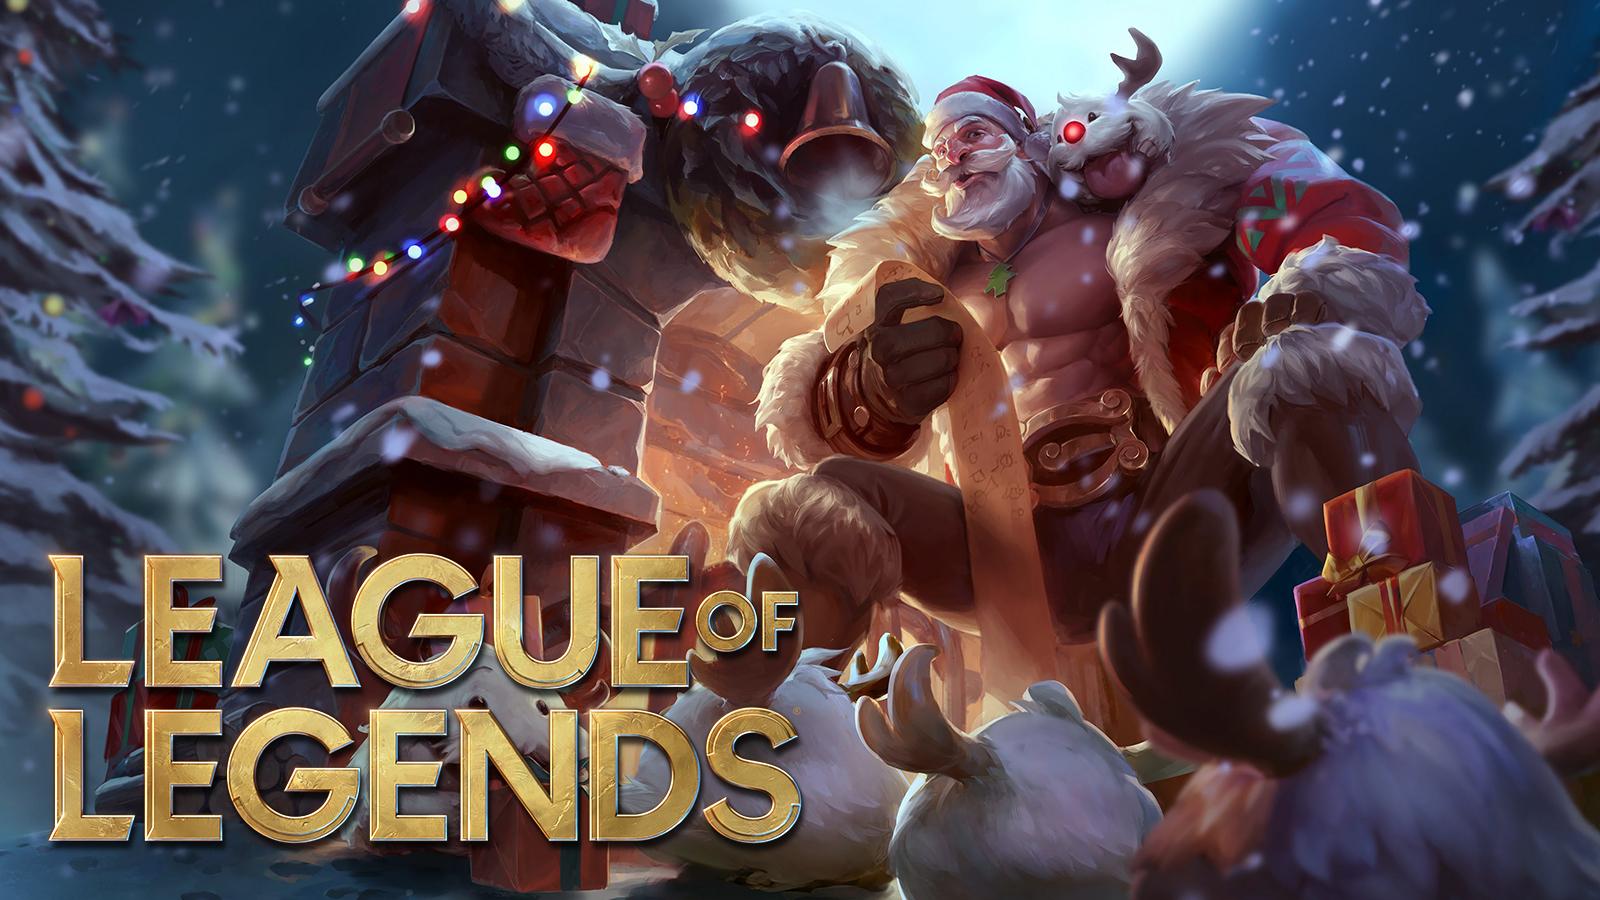 Guide] What is Support in Legends of Runeterra? - Inven Global